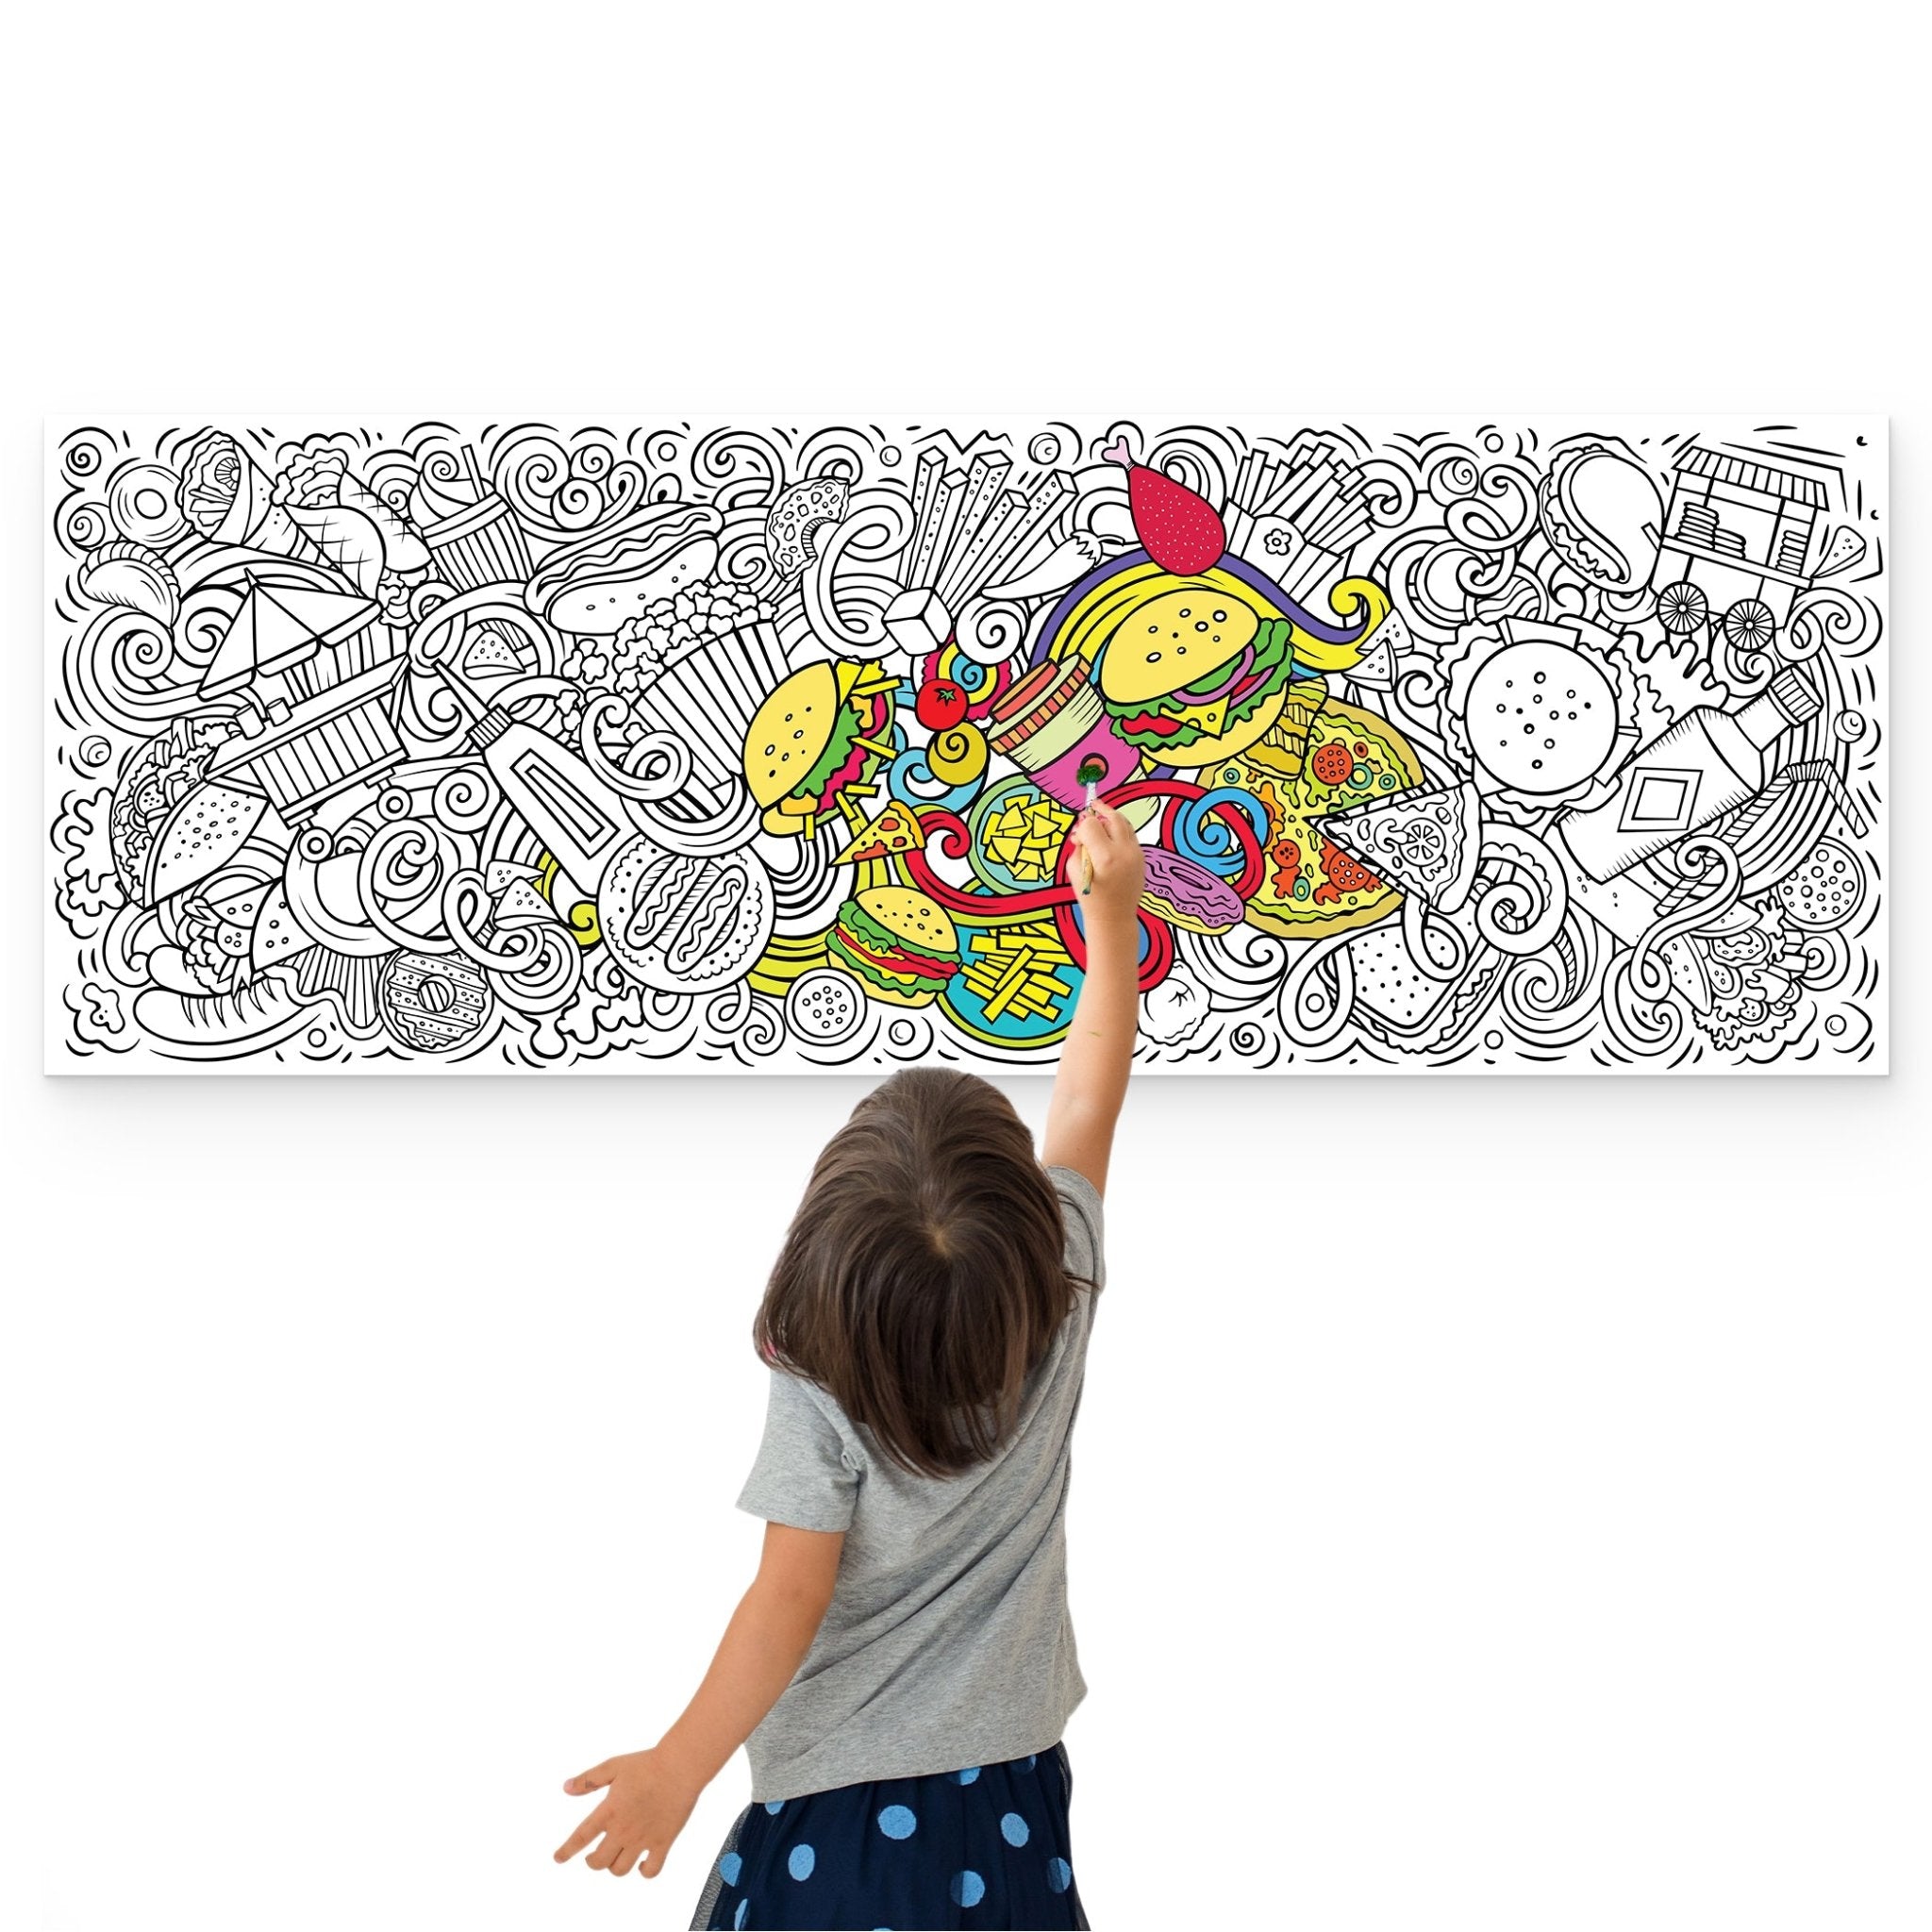 Giant Coloring Poster - Junk Food Doodle